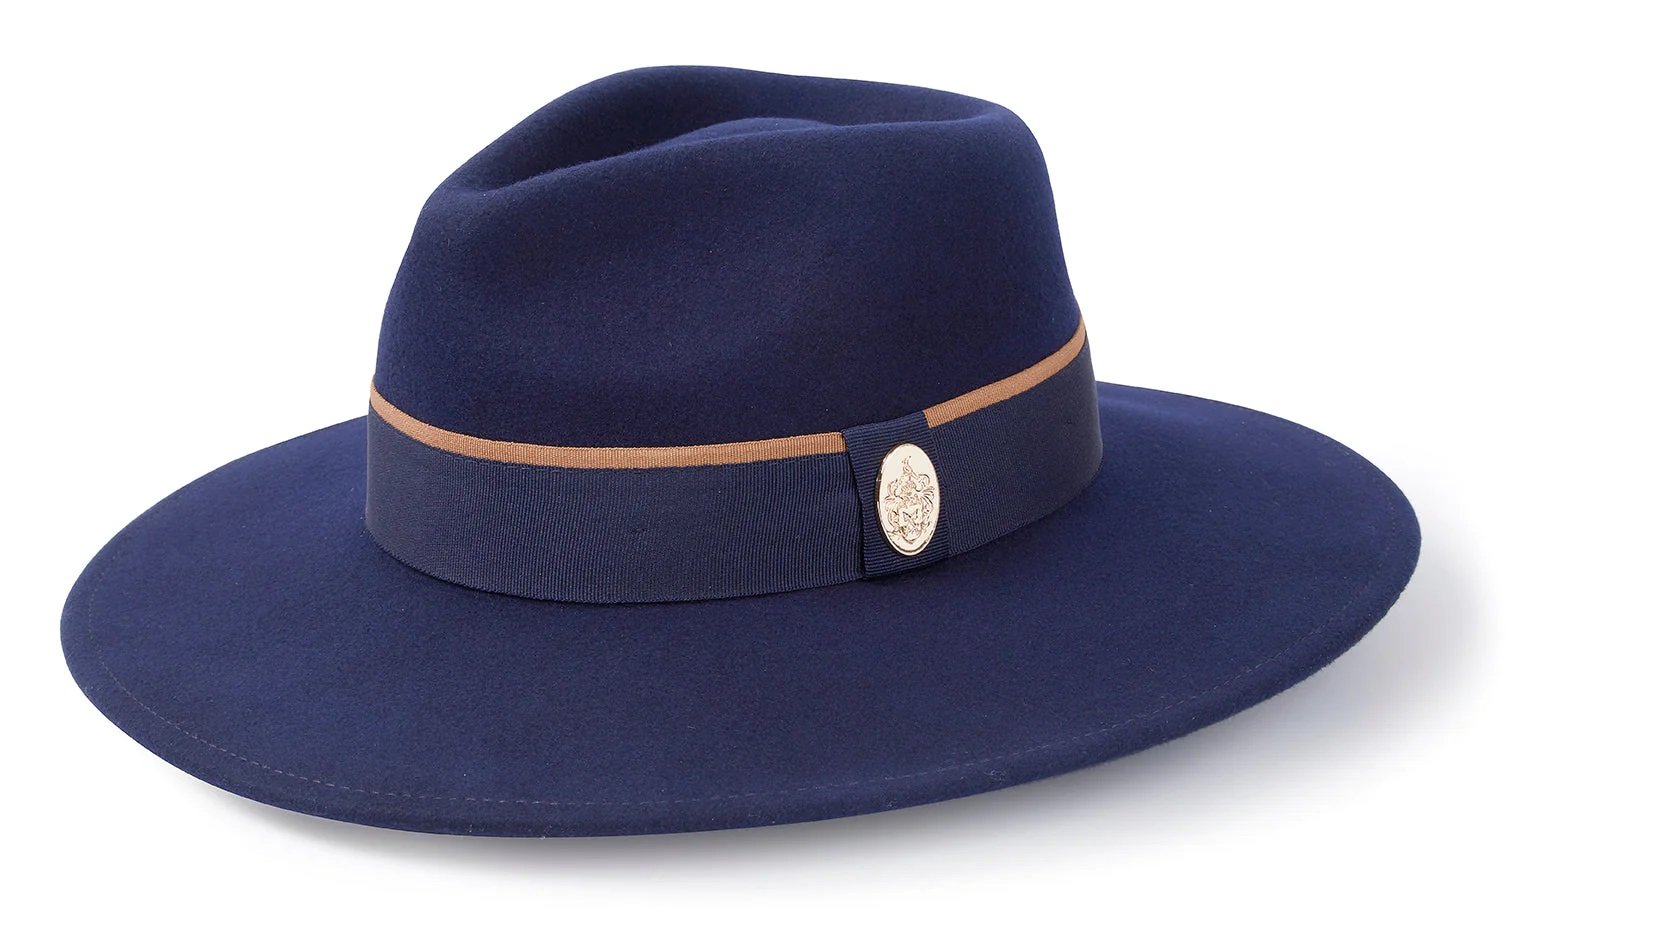 Hicks & Brown The Oxley Fedora in Navy.jpg